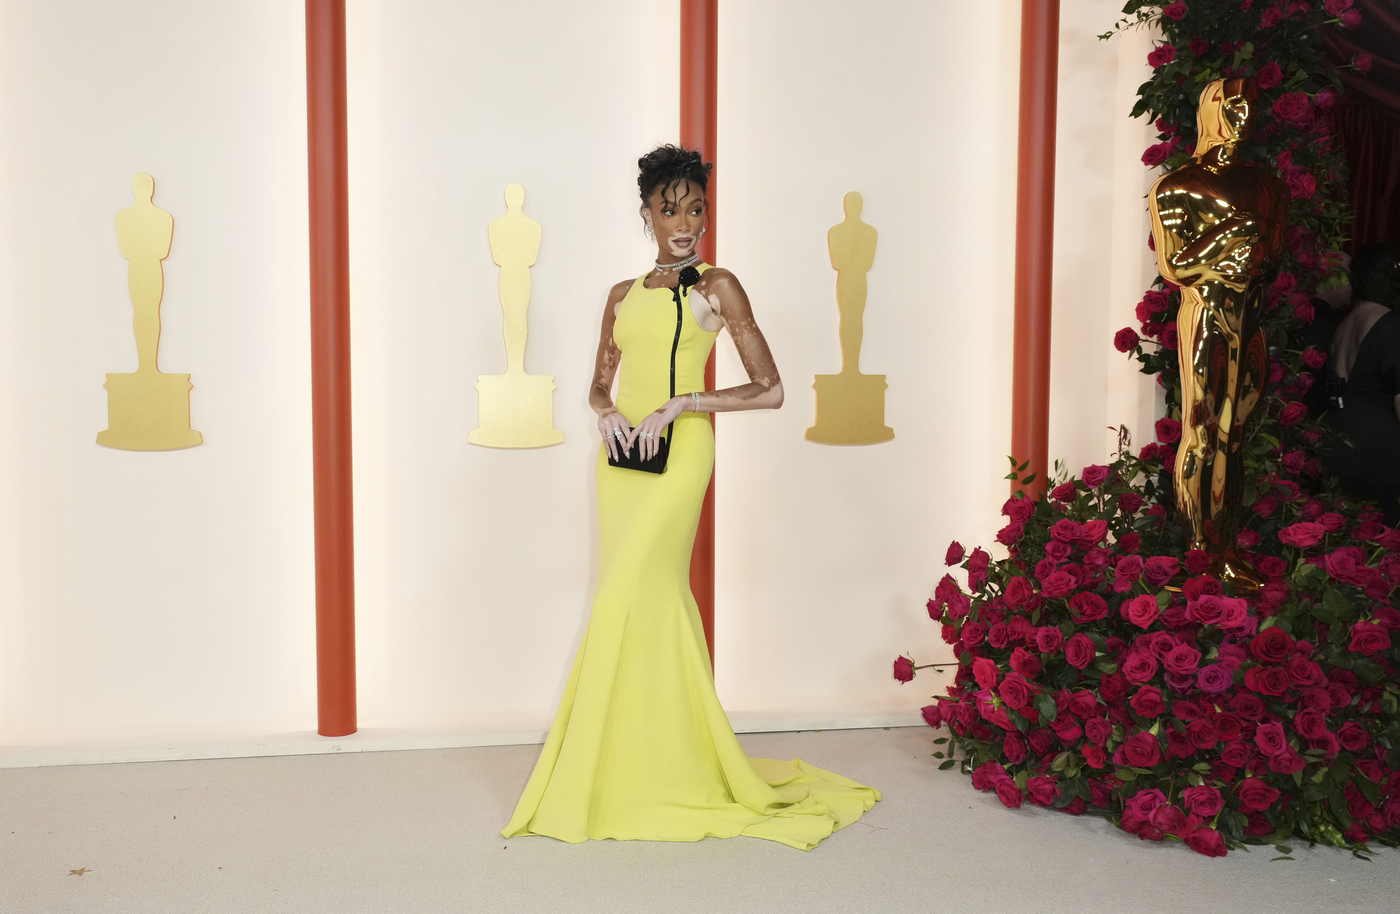 Winnie Harlow arrives at the Oscars on Sunday, March 12, 2023, at the Dolby Theatre in Los Angeles. (Photo by Jordan Strauss/Invision/AP) 


Associated Press/LaPresse

EDITORIAL USE ONLY/ONLY ITALY AND SPAIN